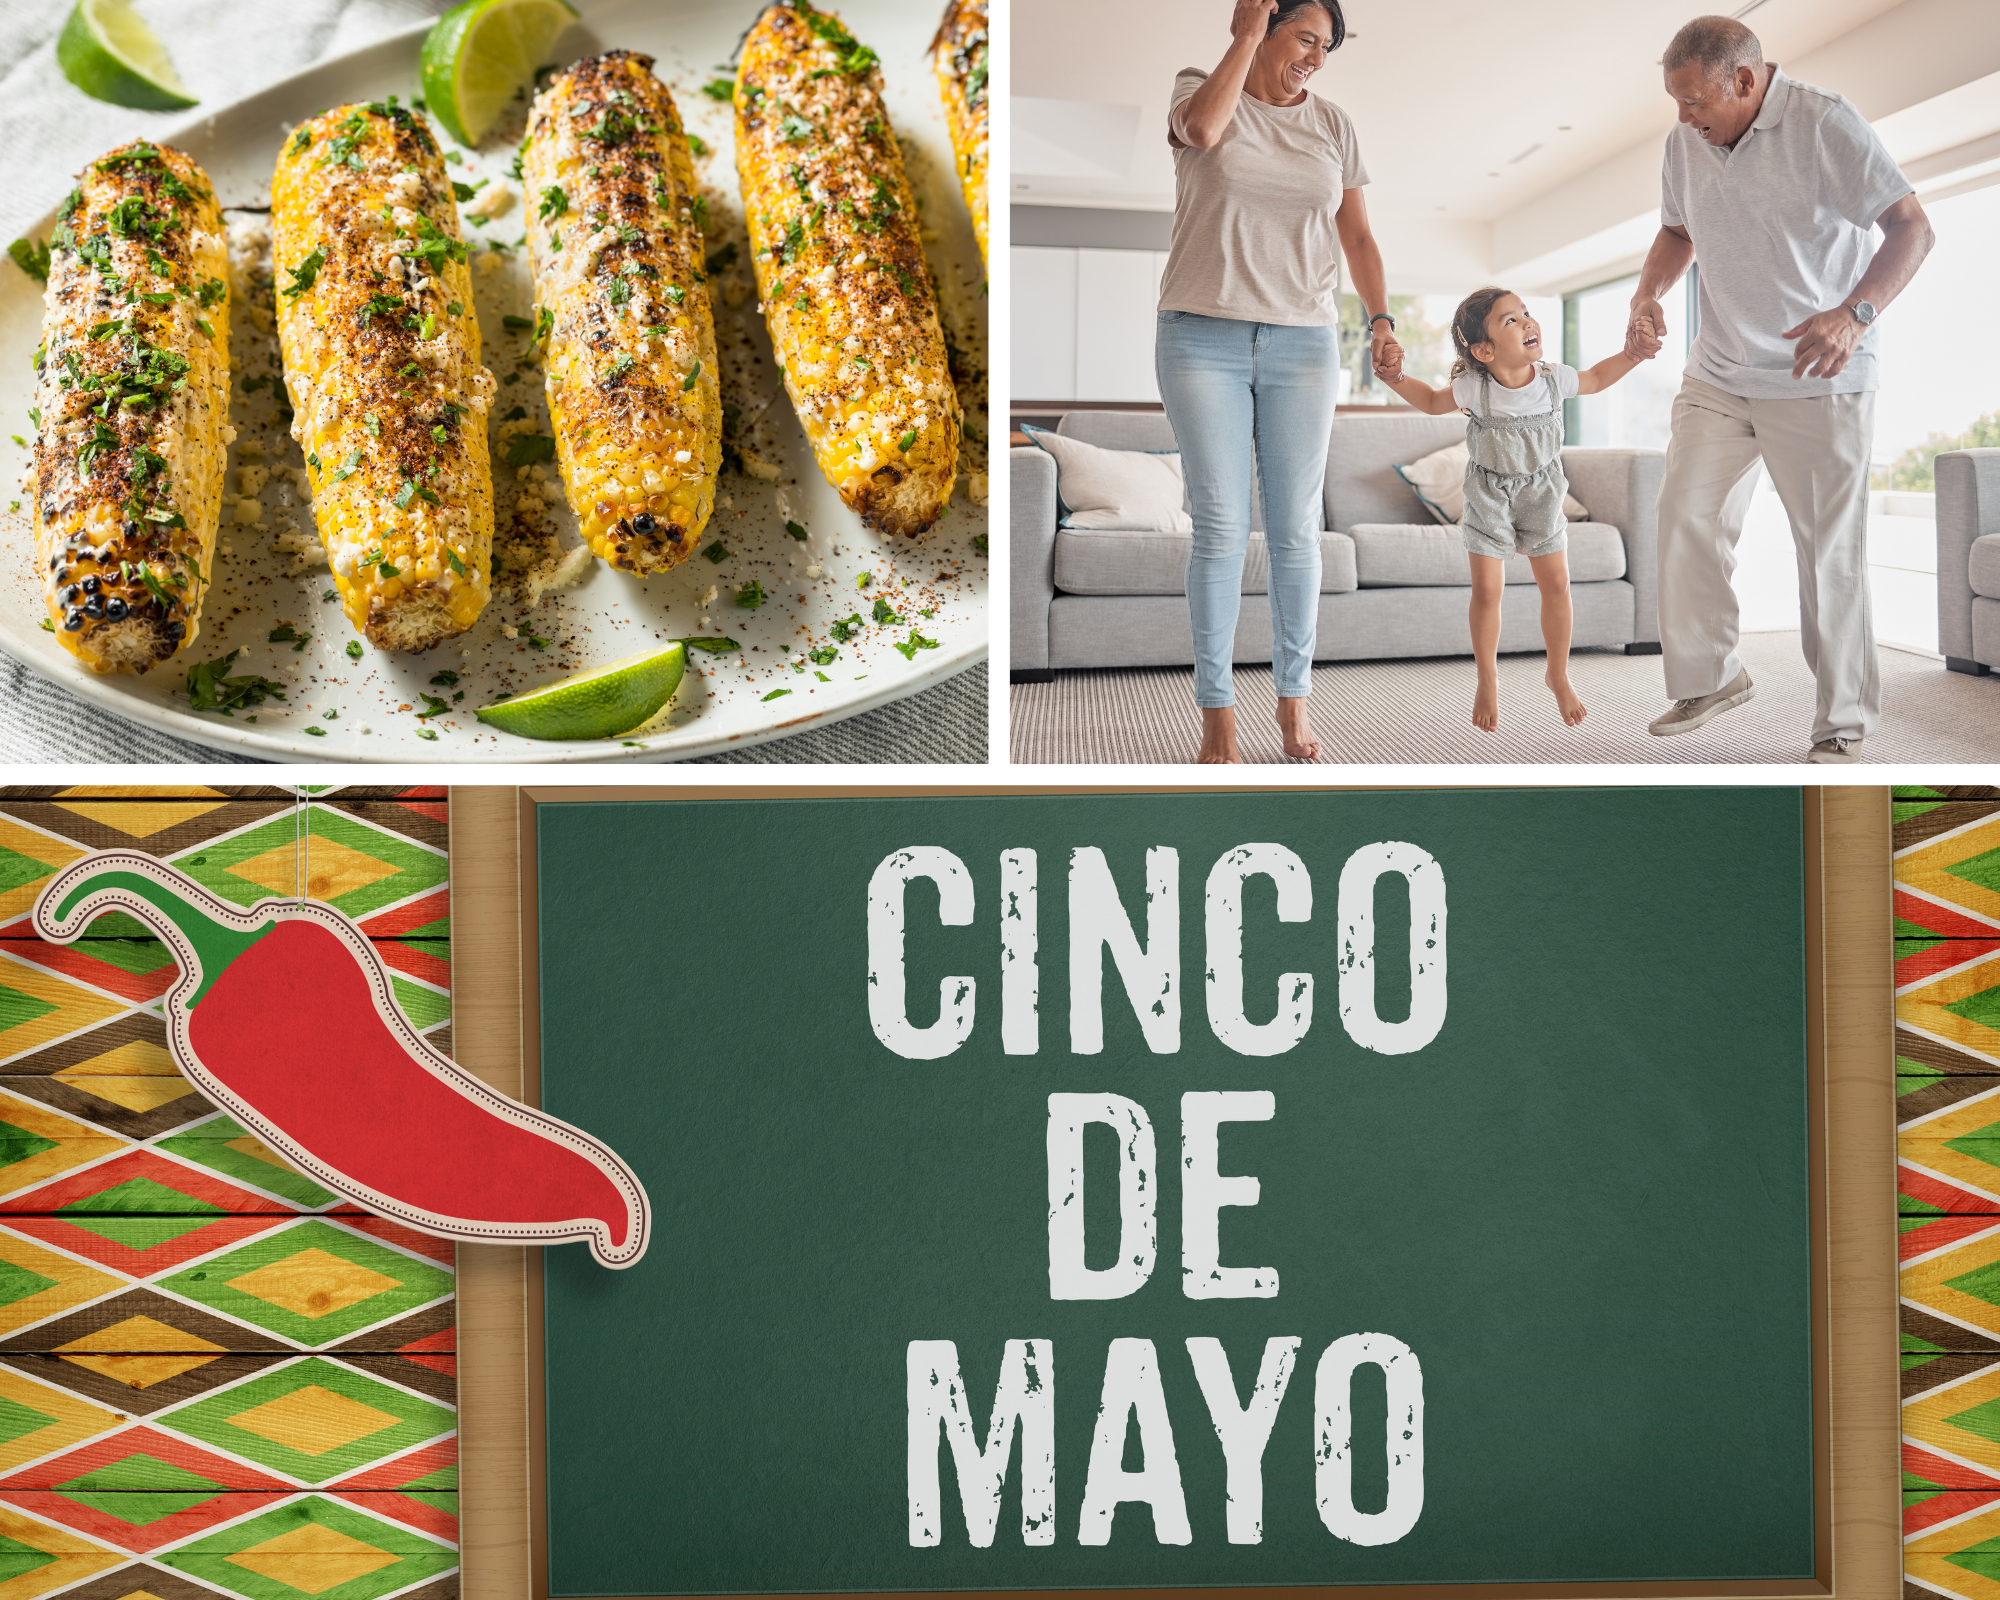 Celebrate Cinco de Mayo with your elderly loved one